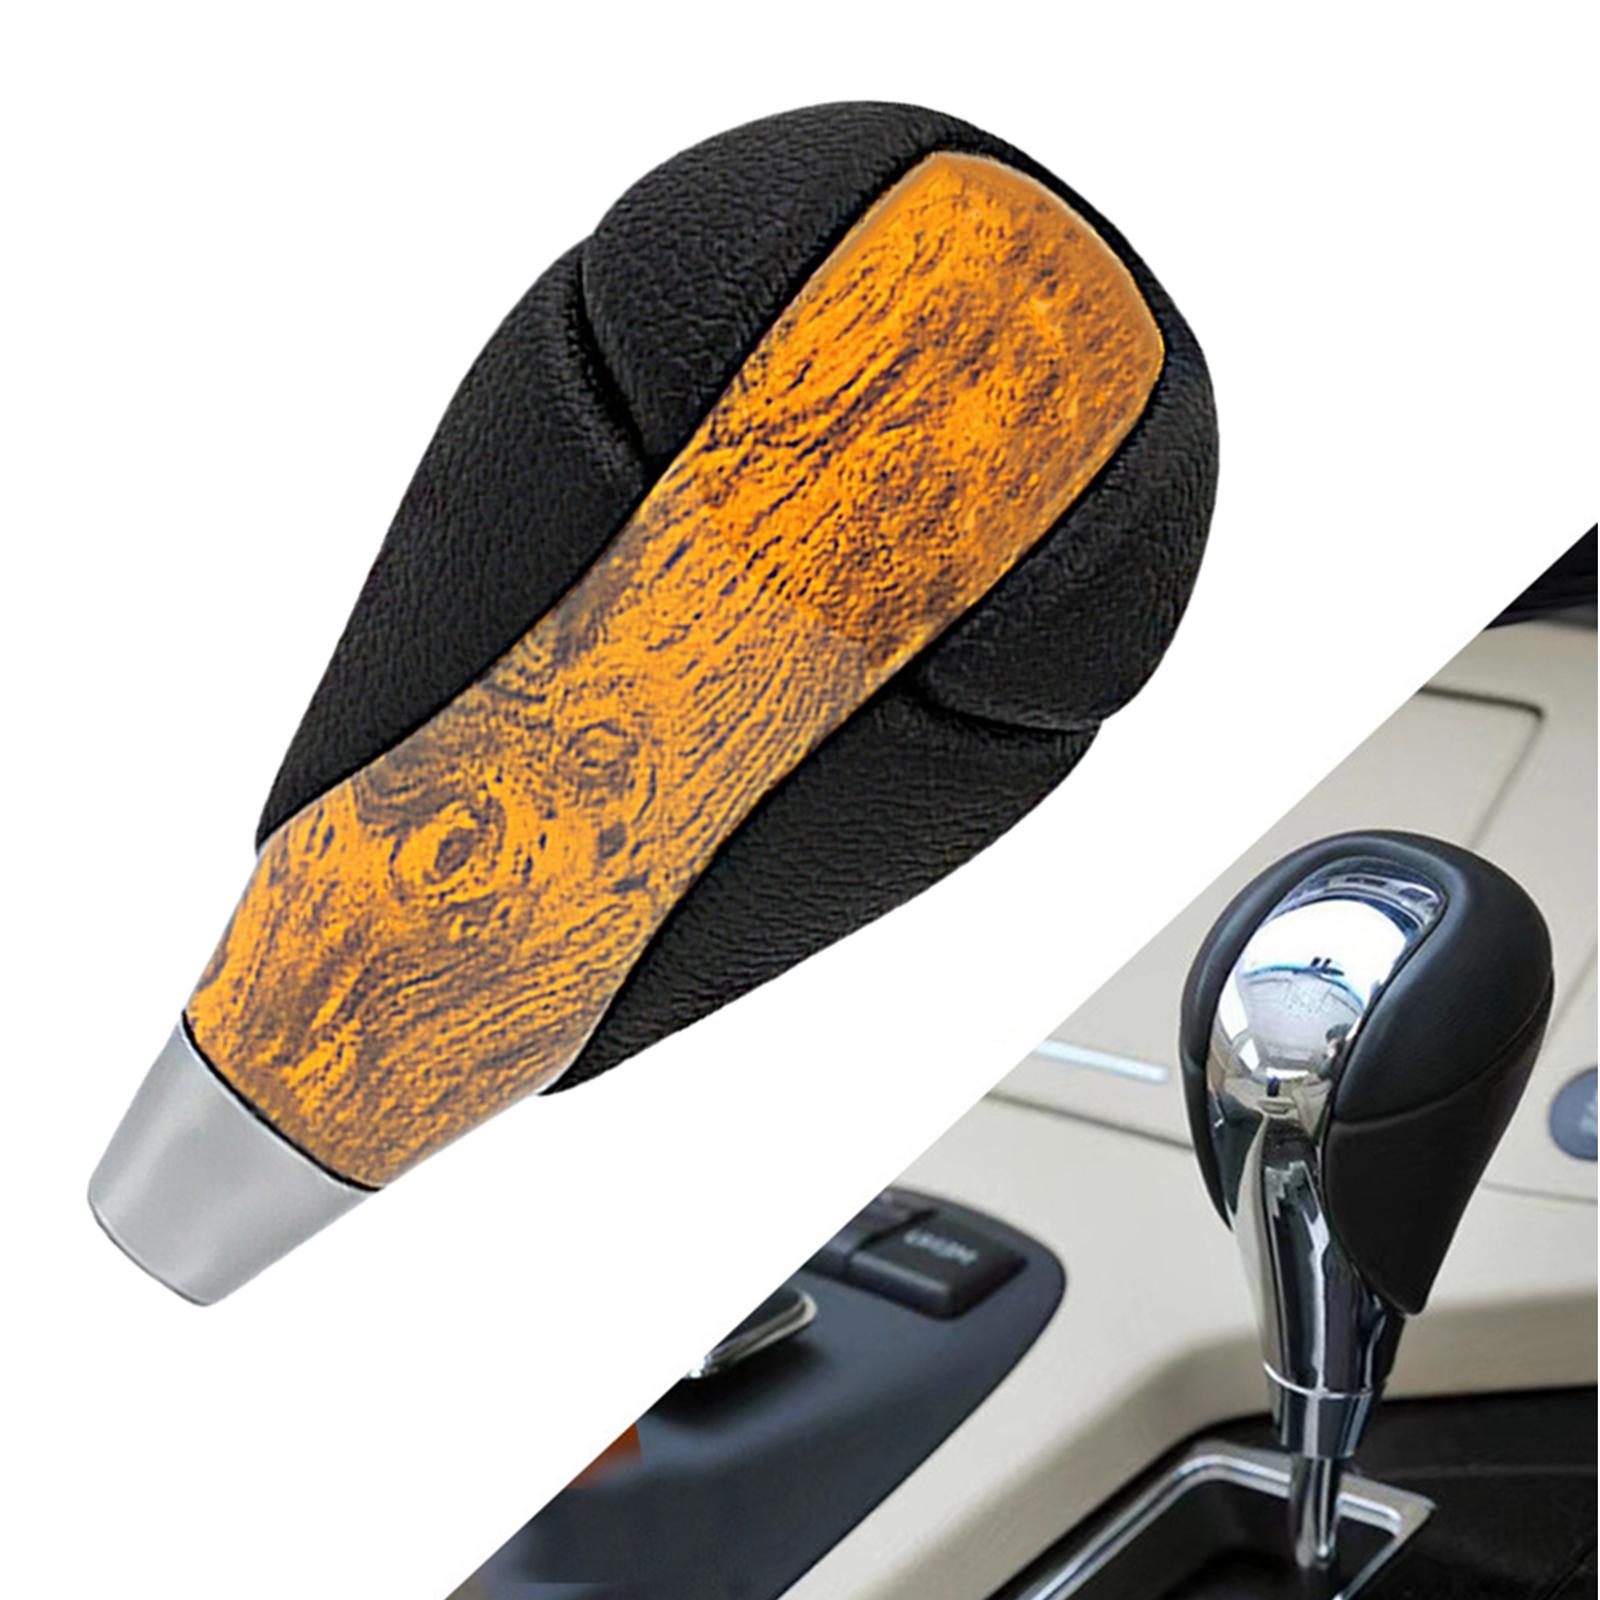 Car Gear Shift Knob PU Leather for Toyota Lexus ES300 GS300 IS250 LS460 Yellow